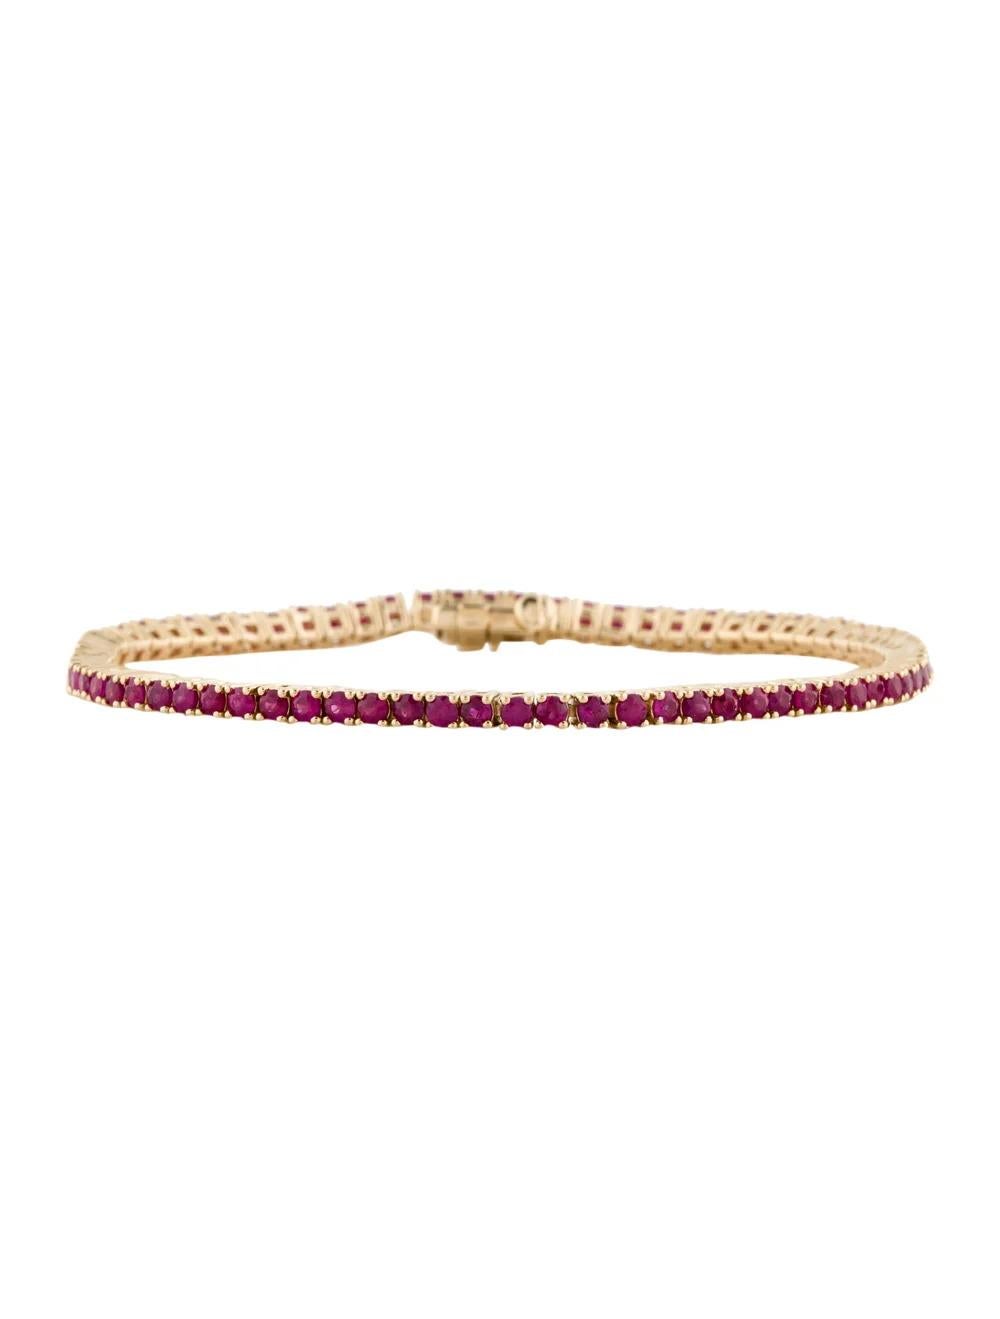 Elevate your style with this exquisite 14K Yellow Gold Ruby Link Bracelet, adorned with a stunning 2.66 carat Round Brilliant Ruby. Crafted to perfection, this bracelet exudes elegance and sophistication, making it a perfect addition to any jewelry